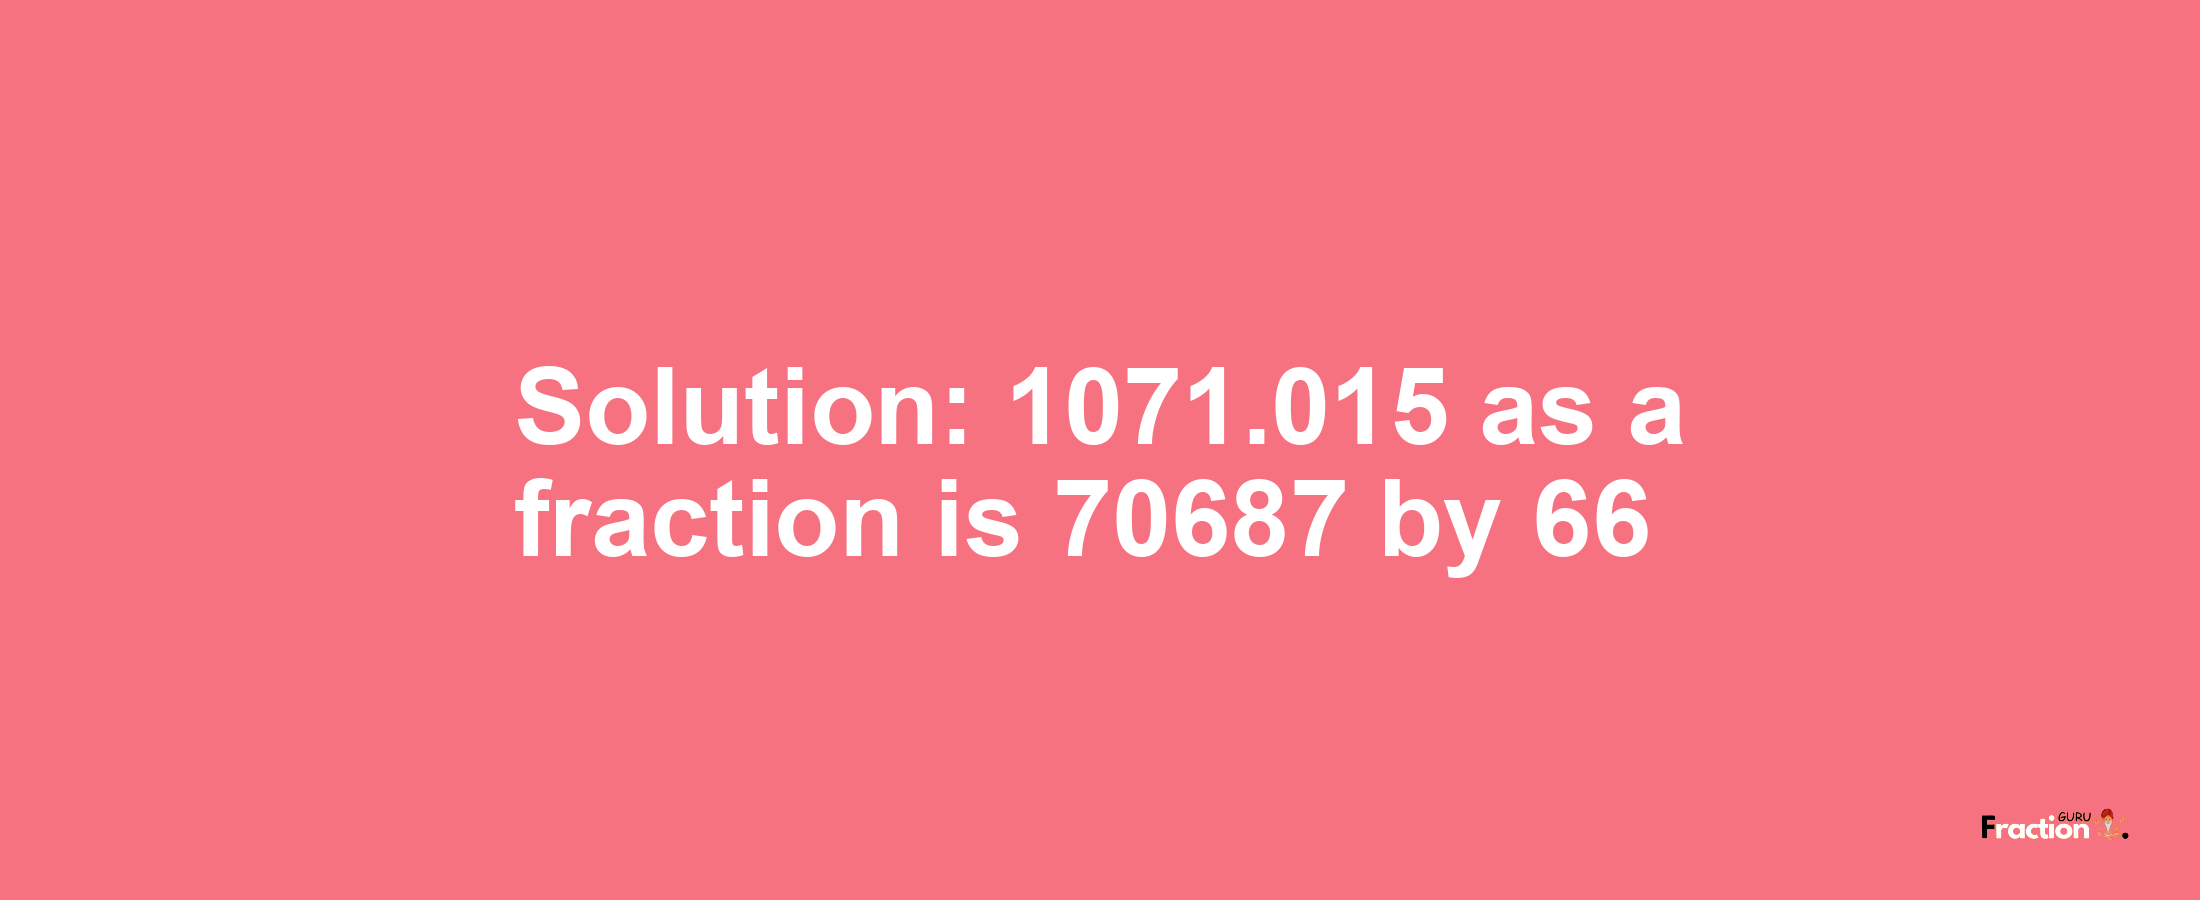 Solution:1071.015 as a fraction is 70687/66